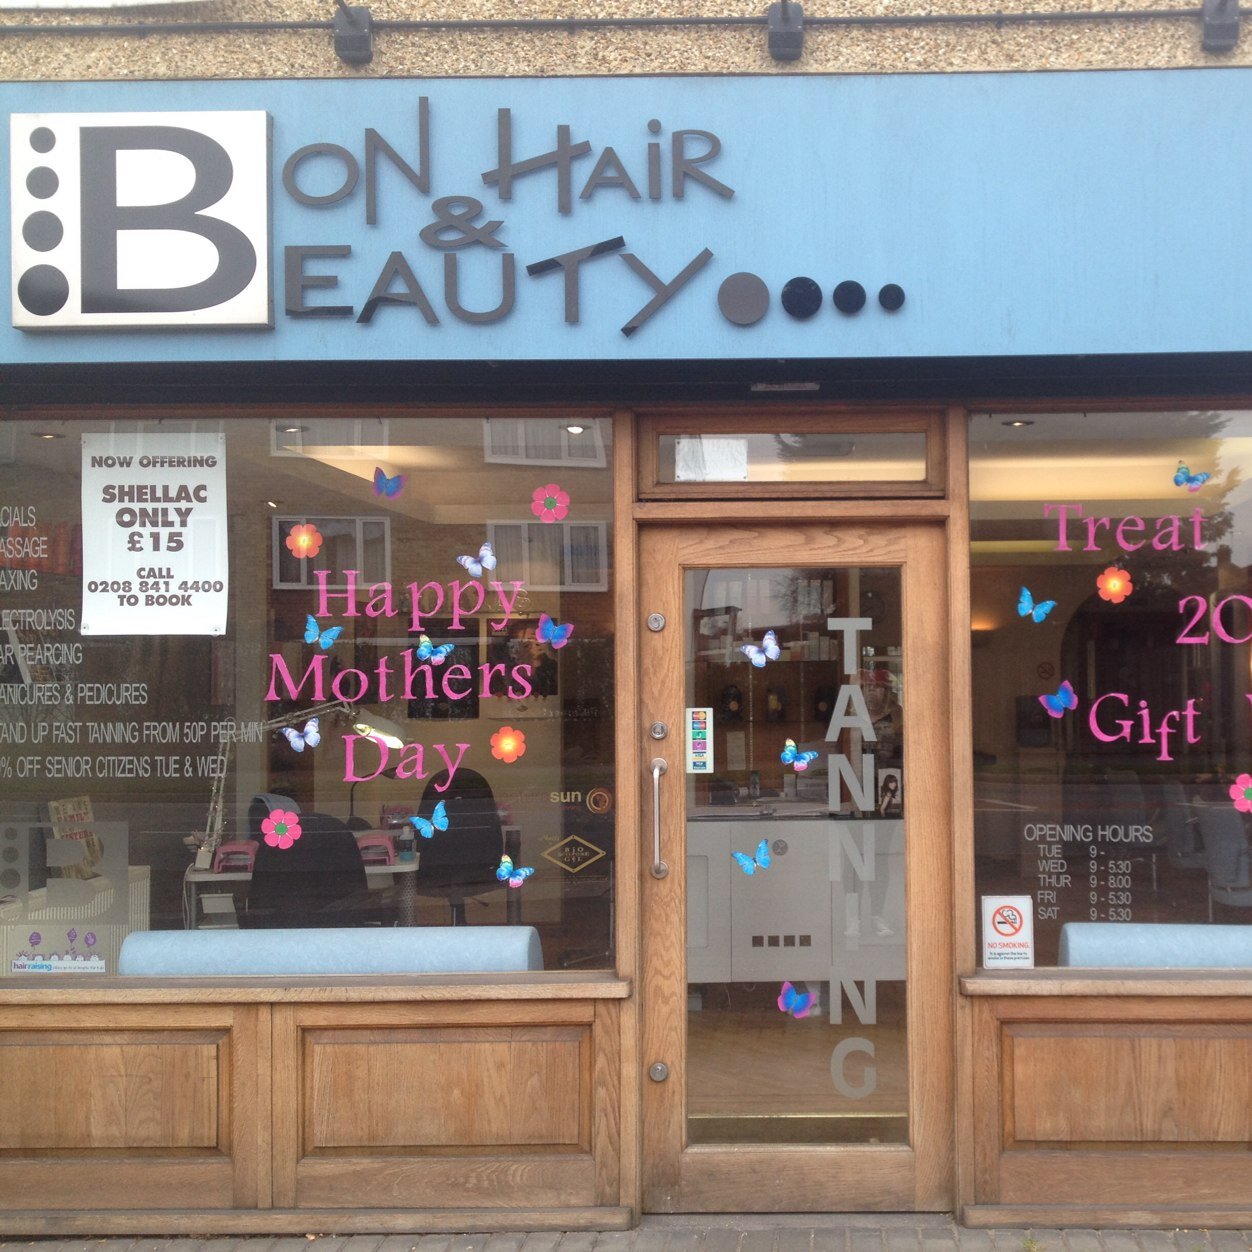 Call 0208 841 4400 to book all hair & beauty treatments!